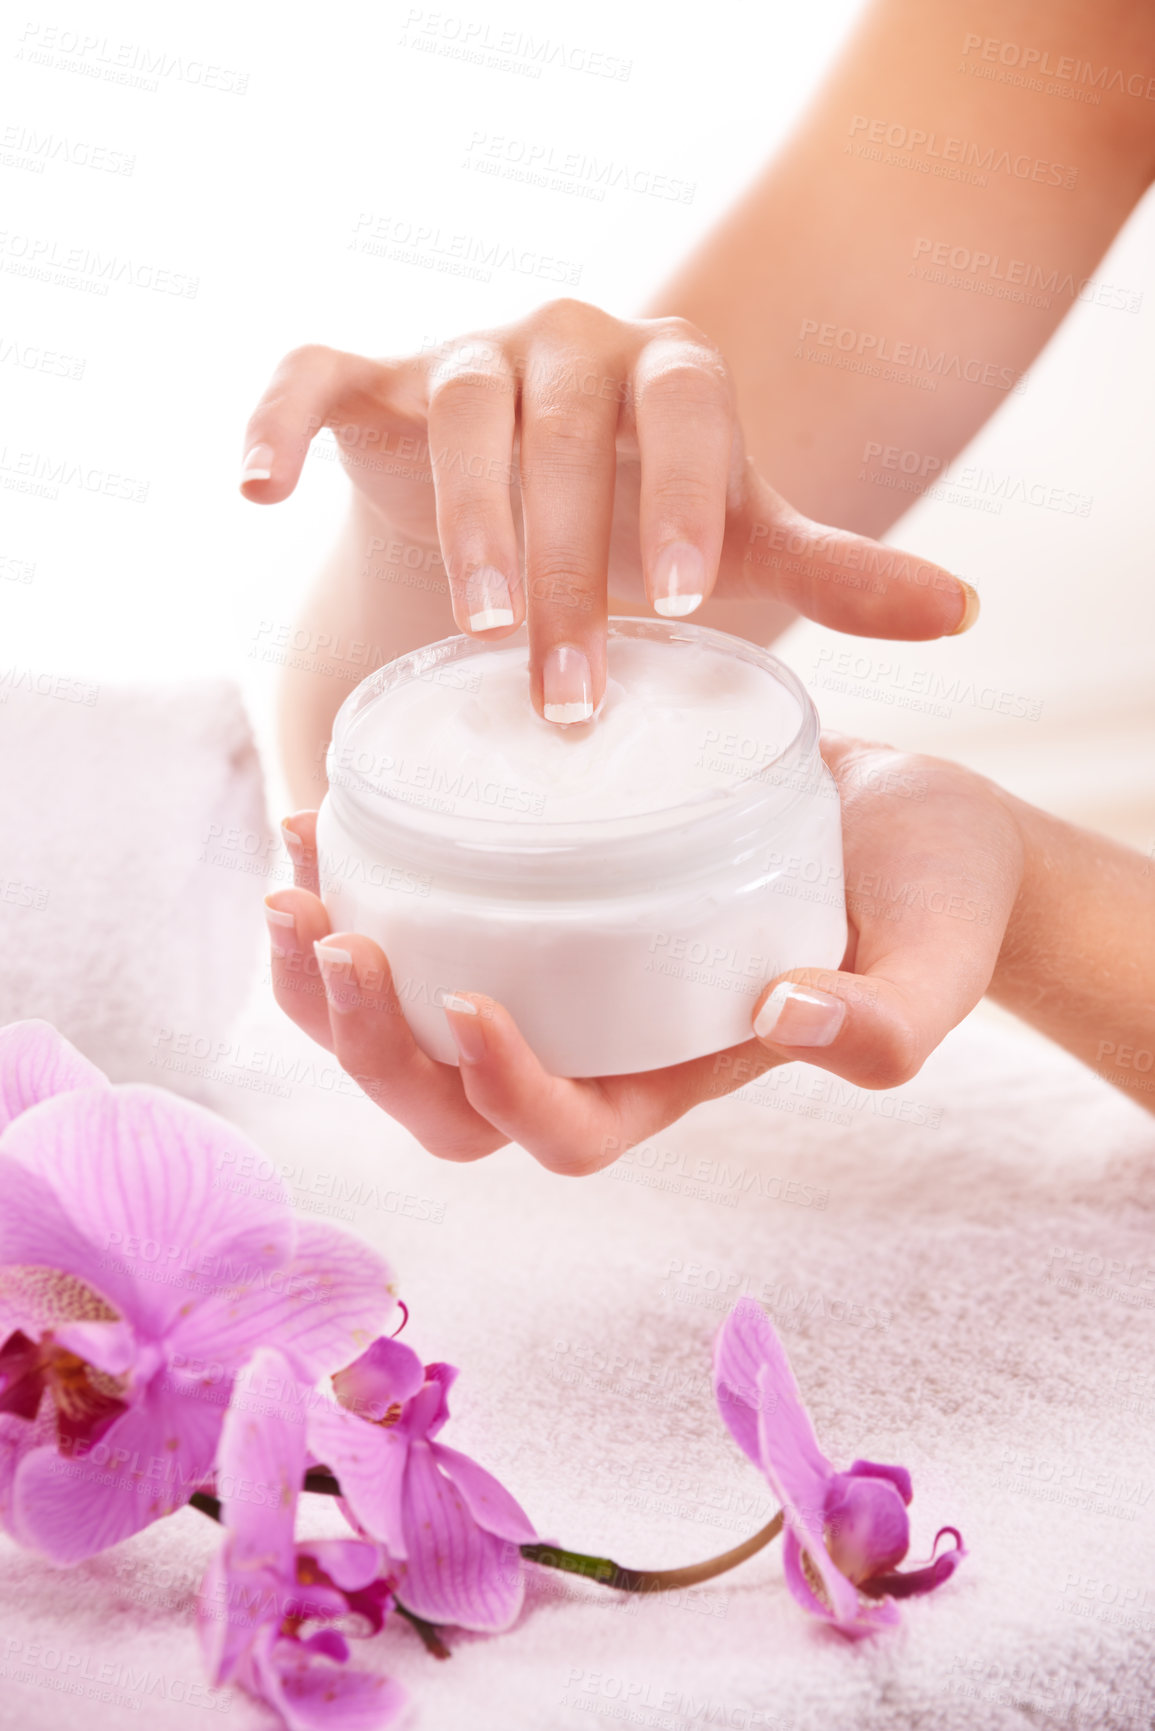 Buy stock photo Cropped shot of a woman holding a jar of hand cream